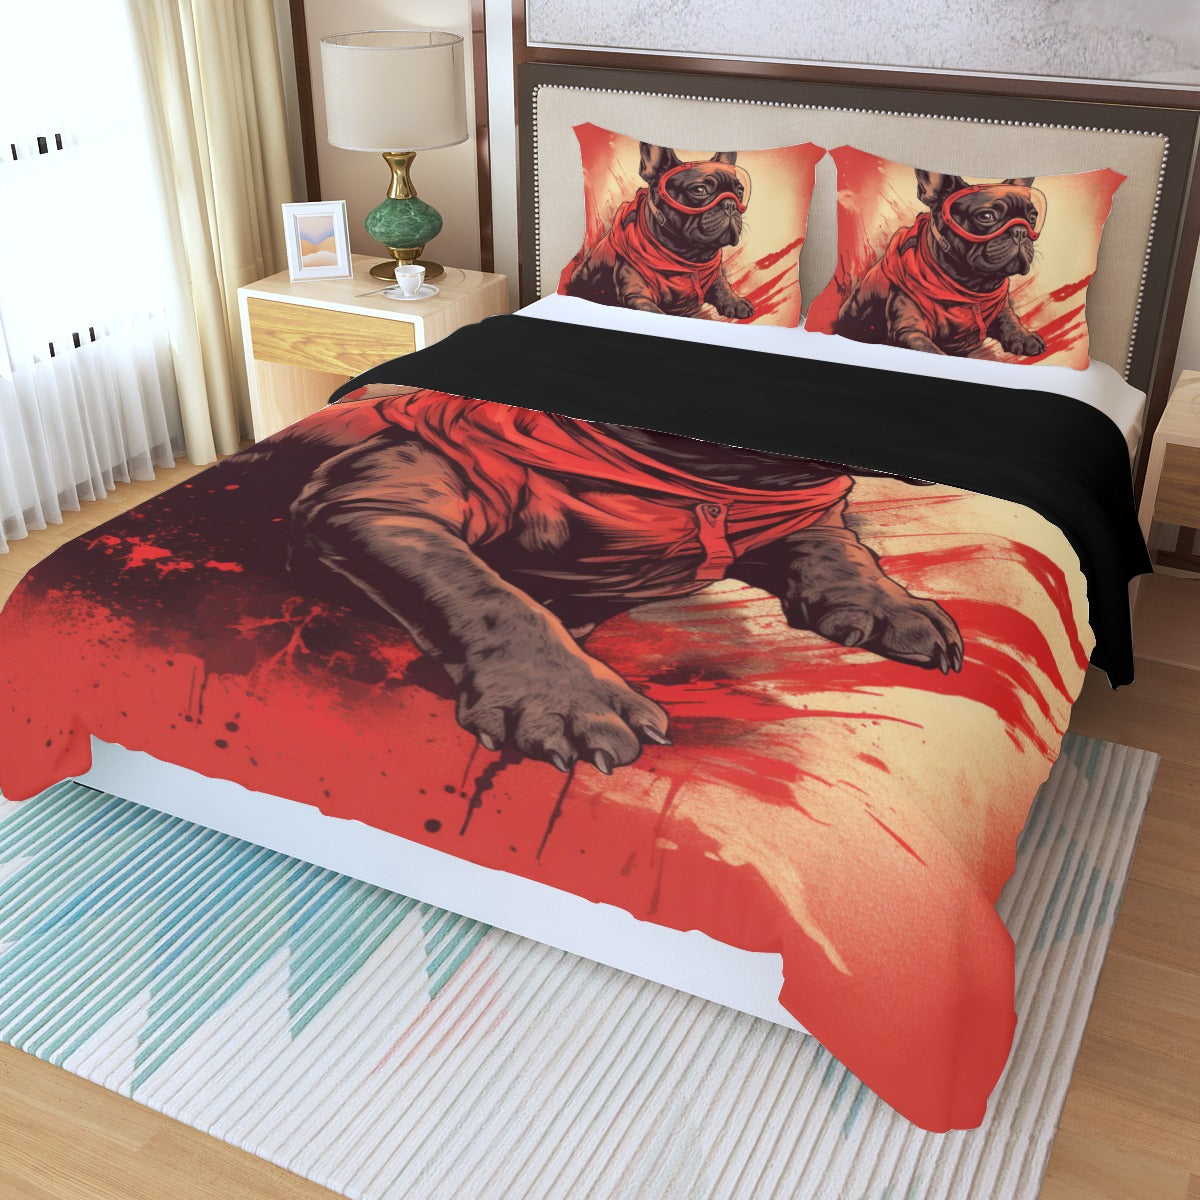 Daring Frenchie Duvet Cover Set - Rest with Courage